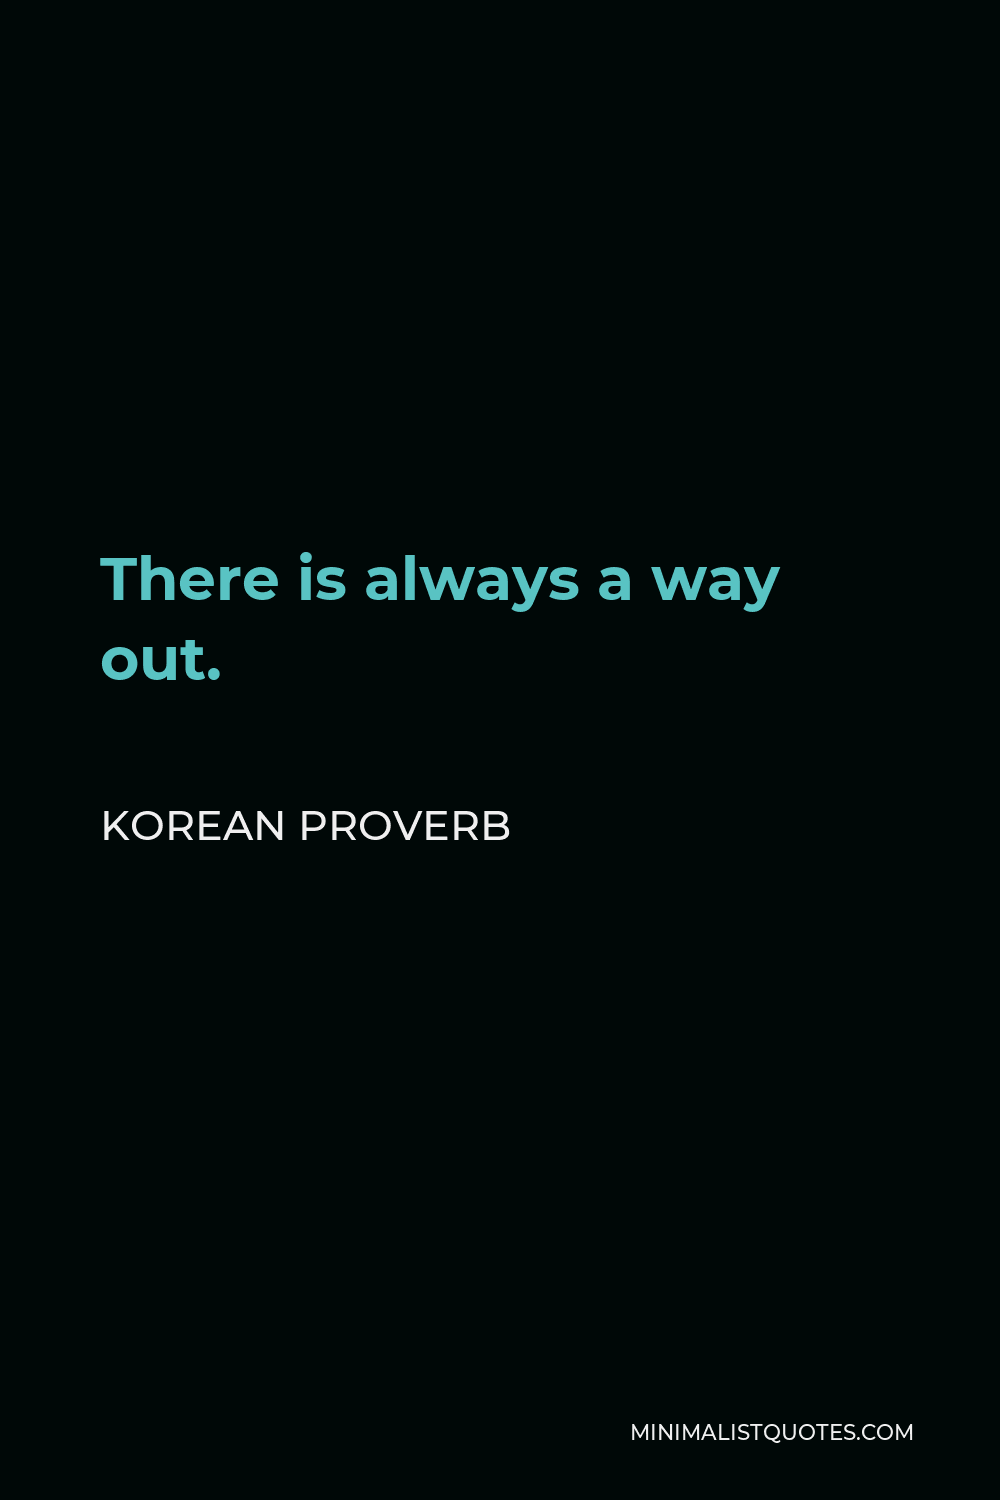 Korean Proverb Quote - There is always a way out.